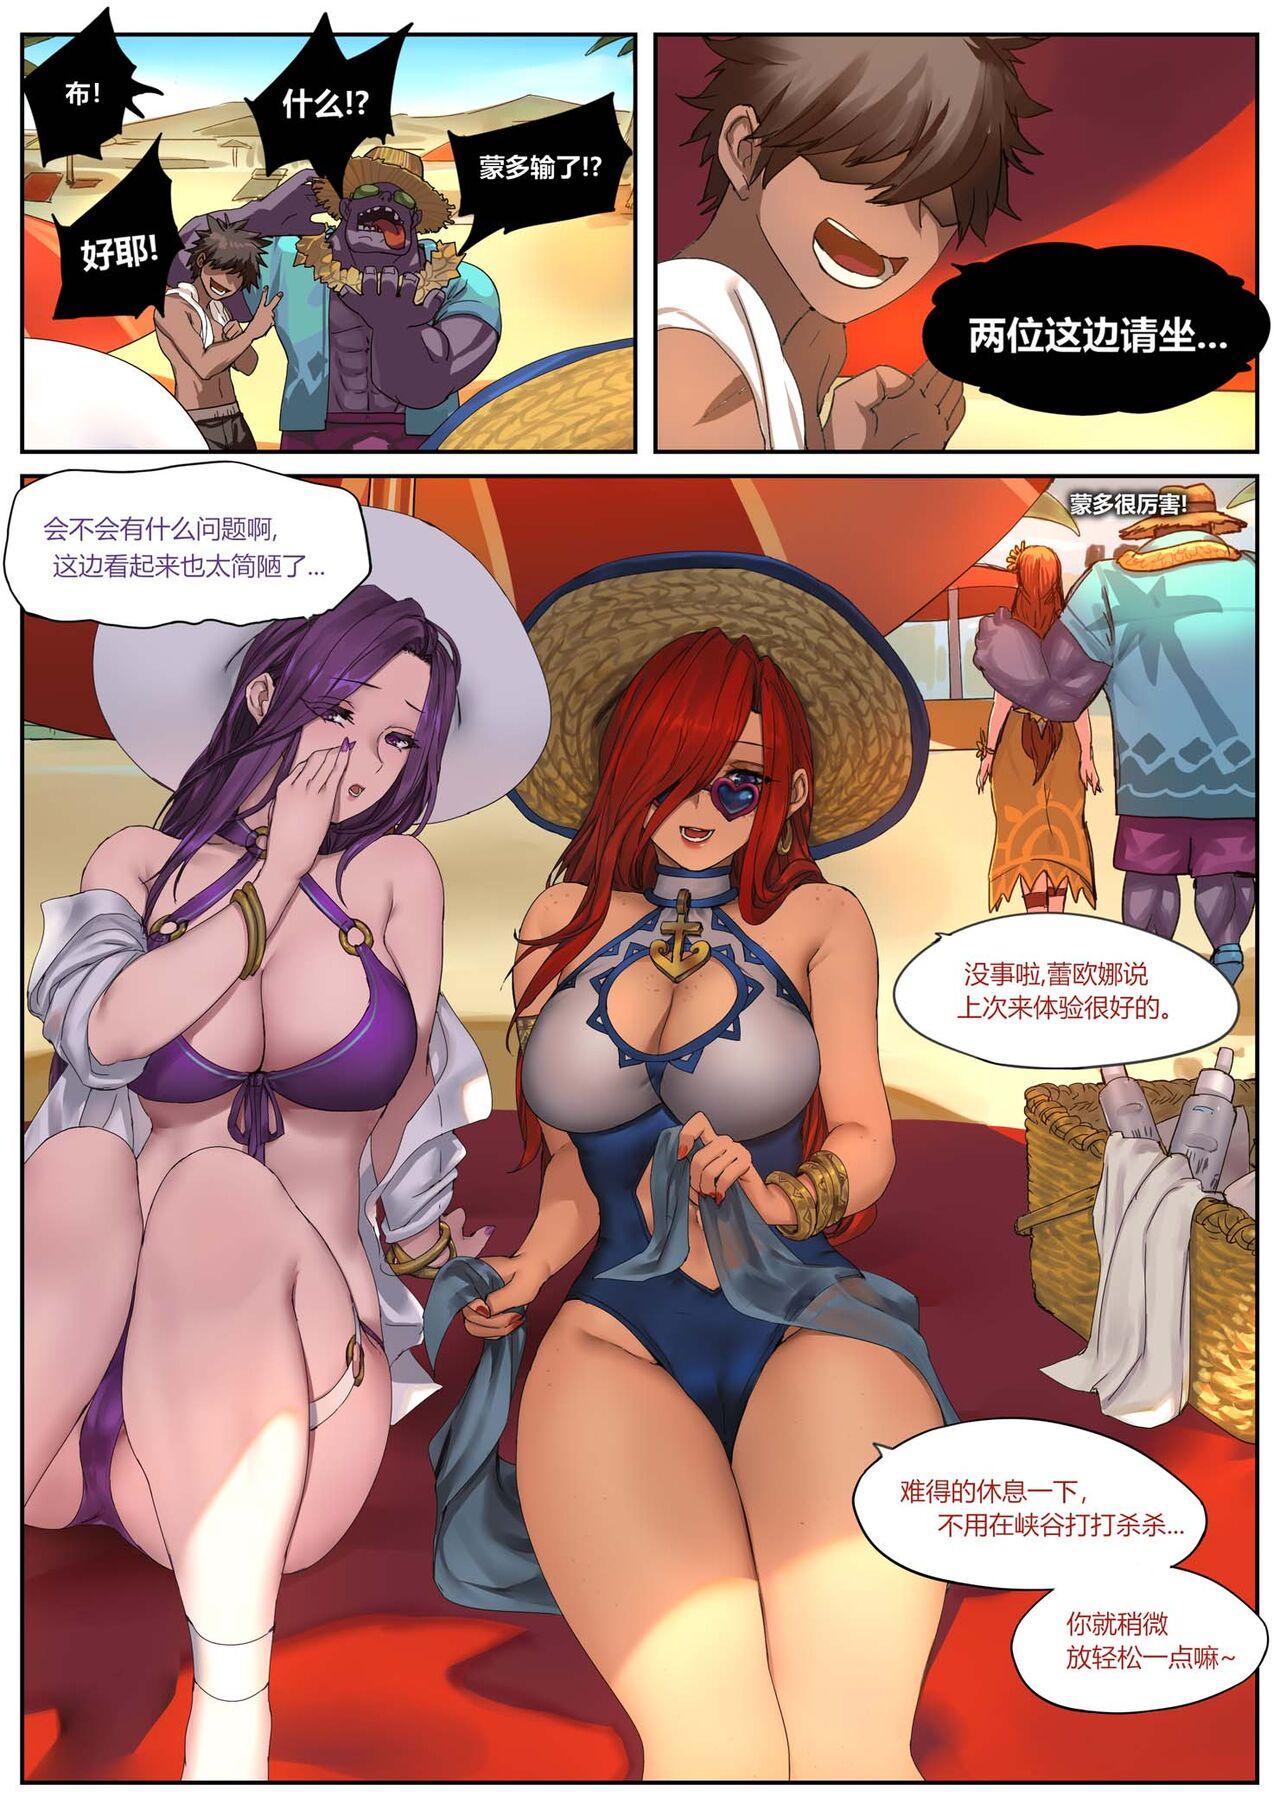 Old 泳池派对2 - League of legends Teenpussy - Page 4